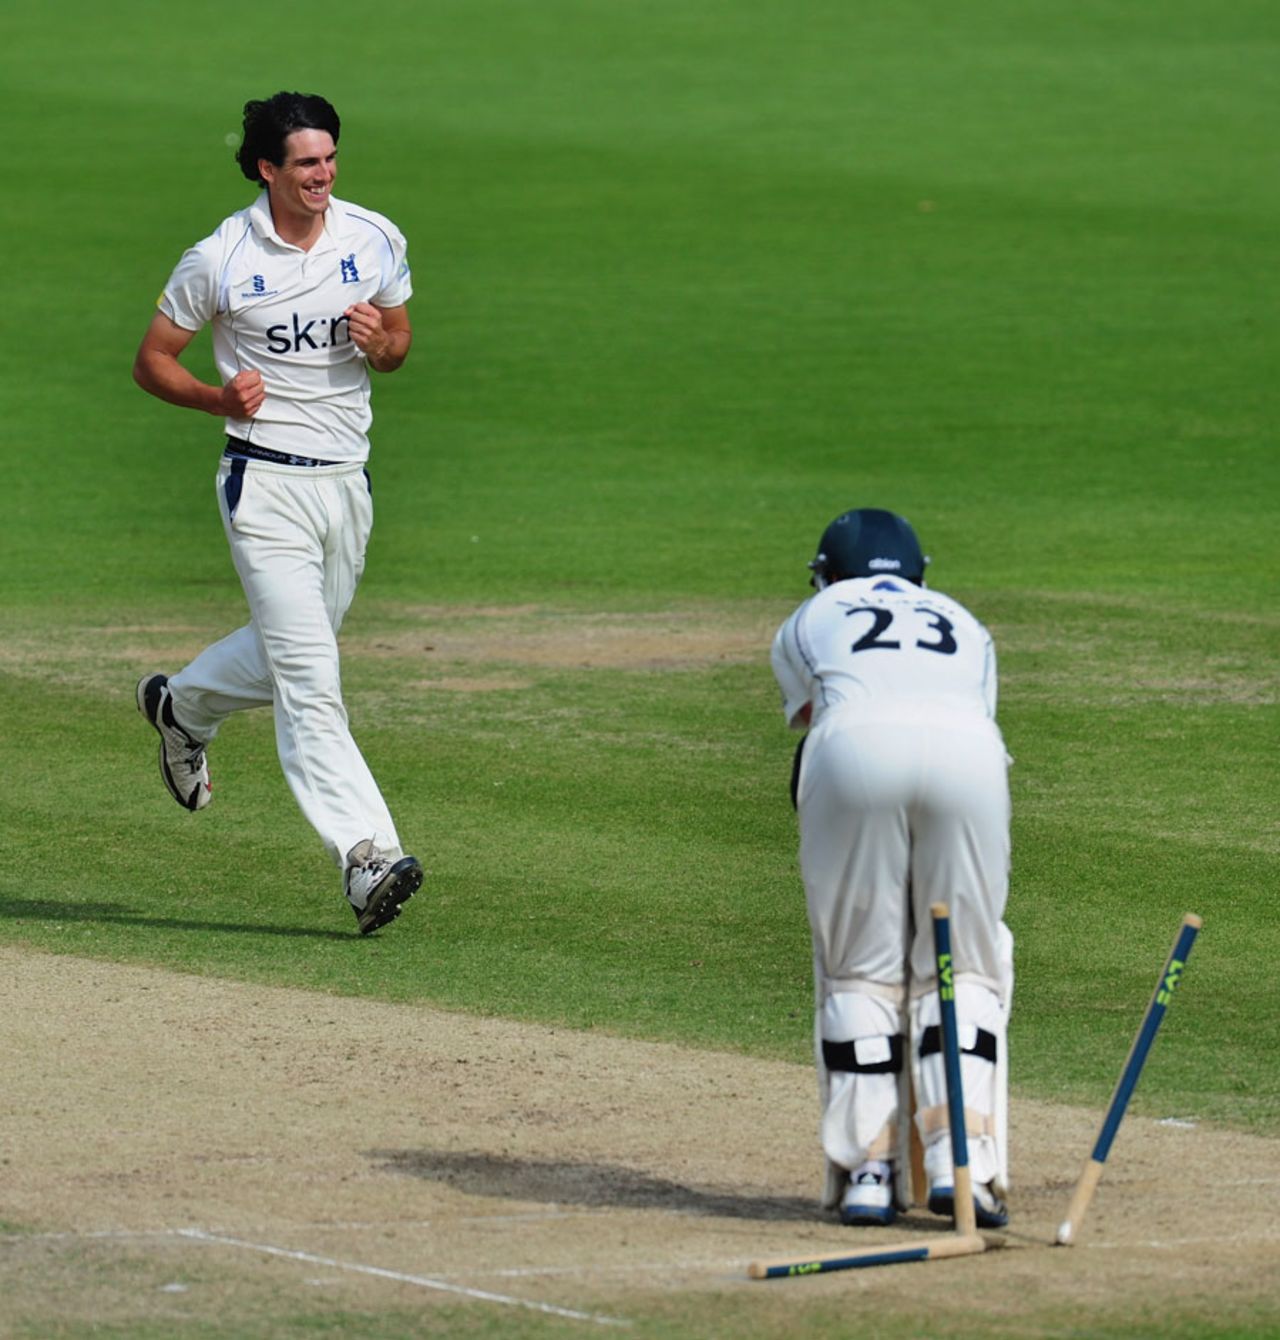 Chris Wright claimed four second-innings wickets and nine in the match, Worcestershire v Warwickshire, County Championship, Division One, New Road, 3rd day, September 6, 2012